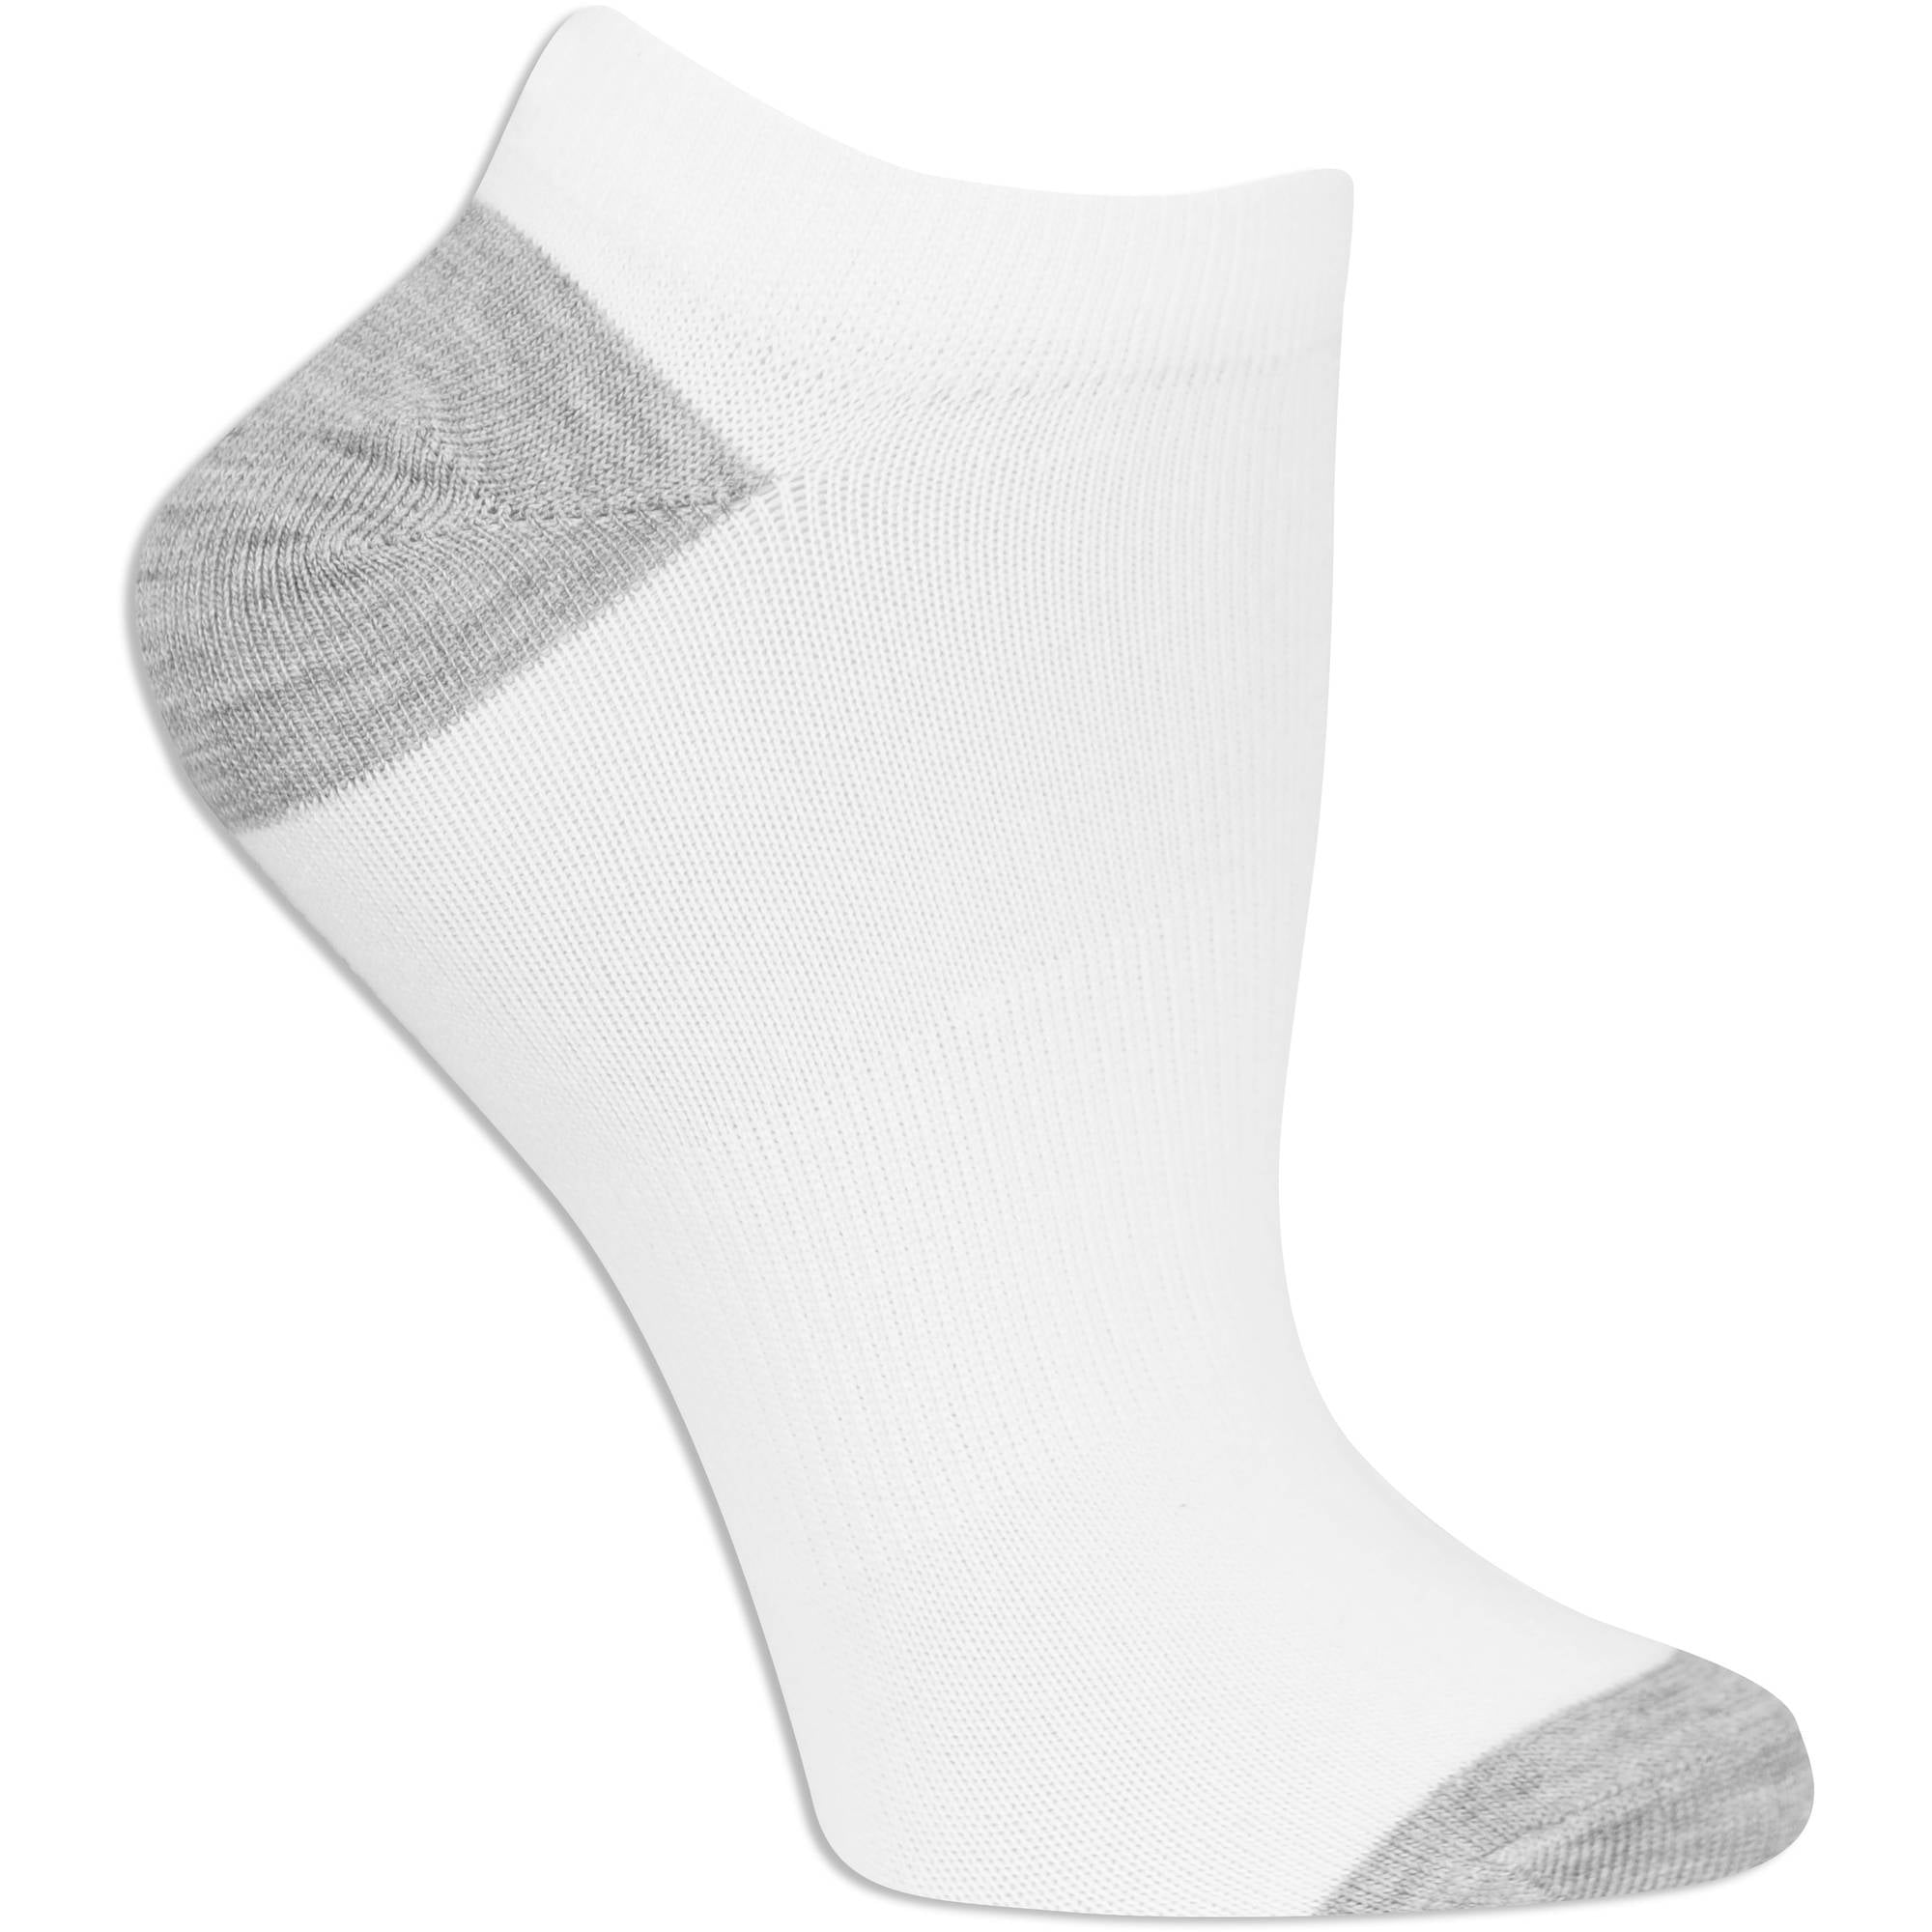 Women's arch support no show socks, 6 